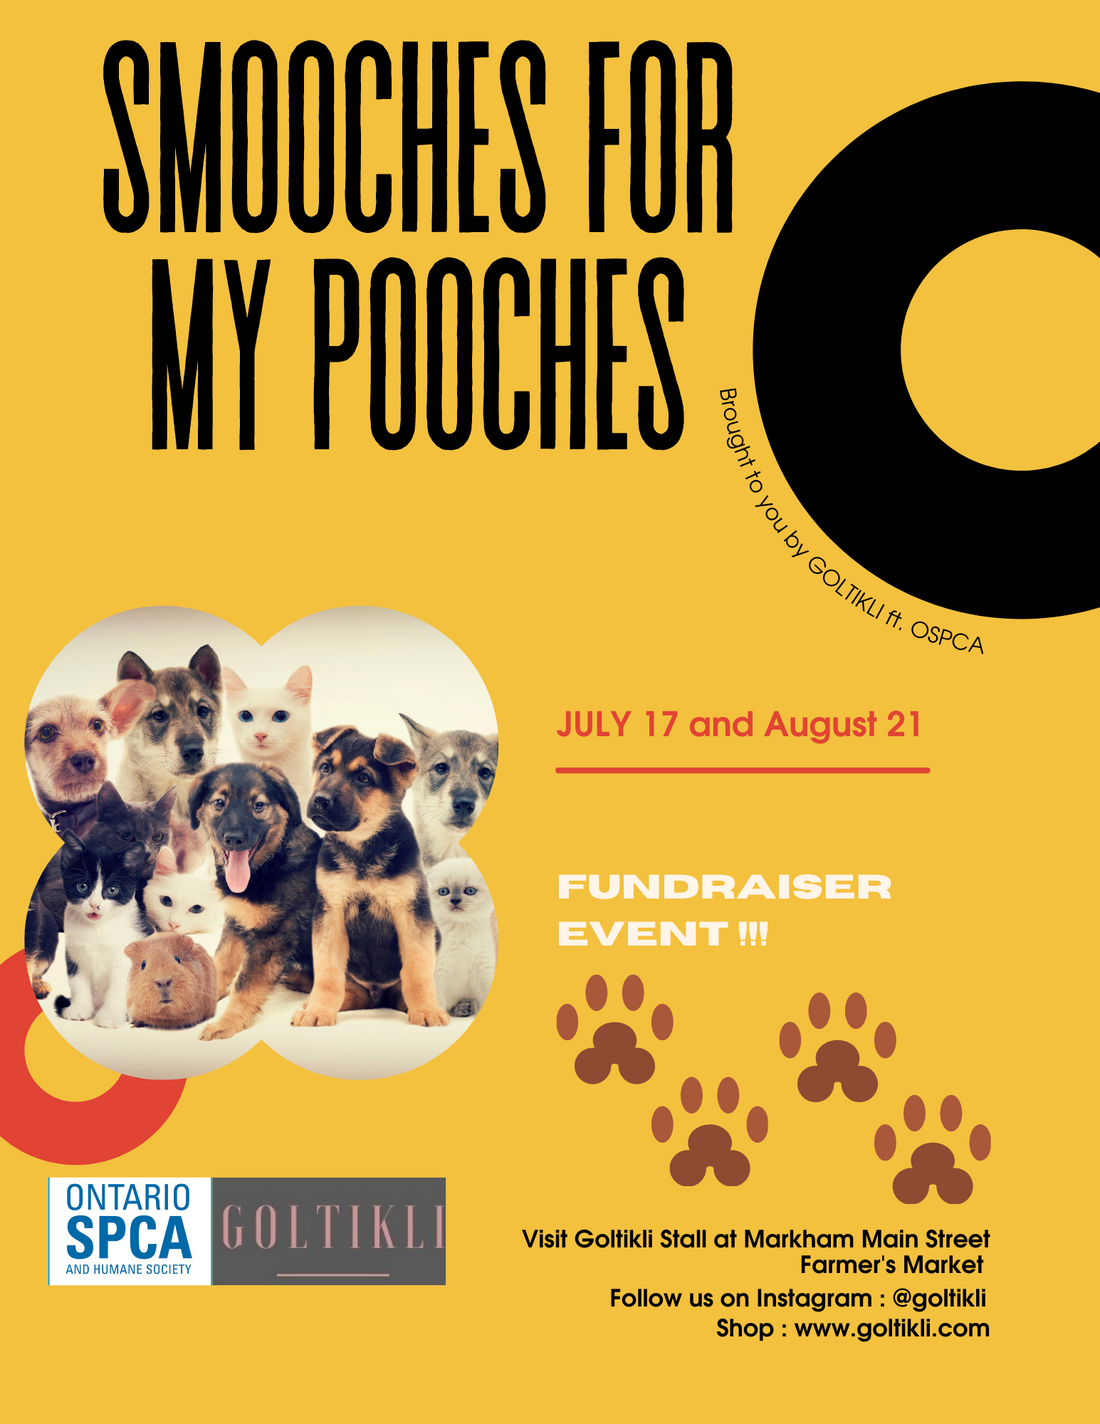 Smooches for Pooches- A fundraiser event with OSPCA